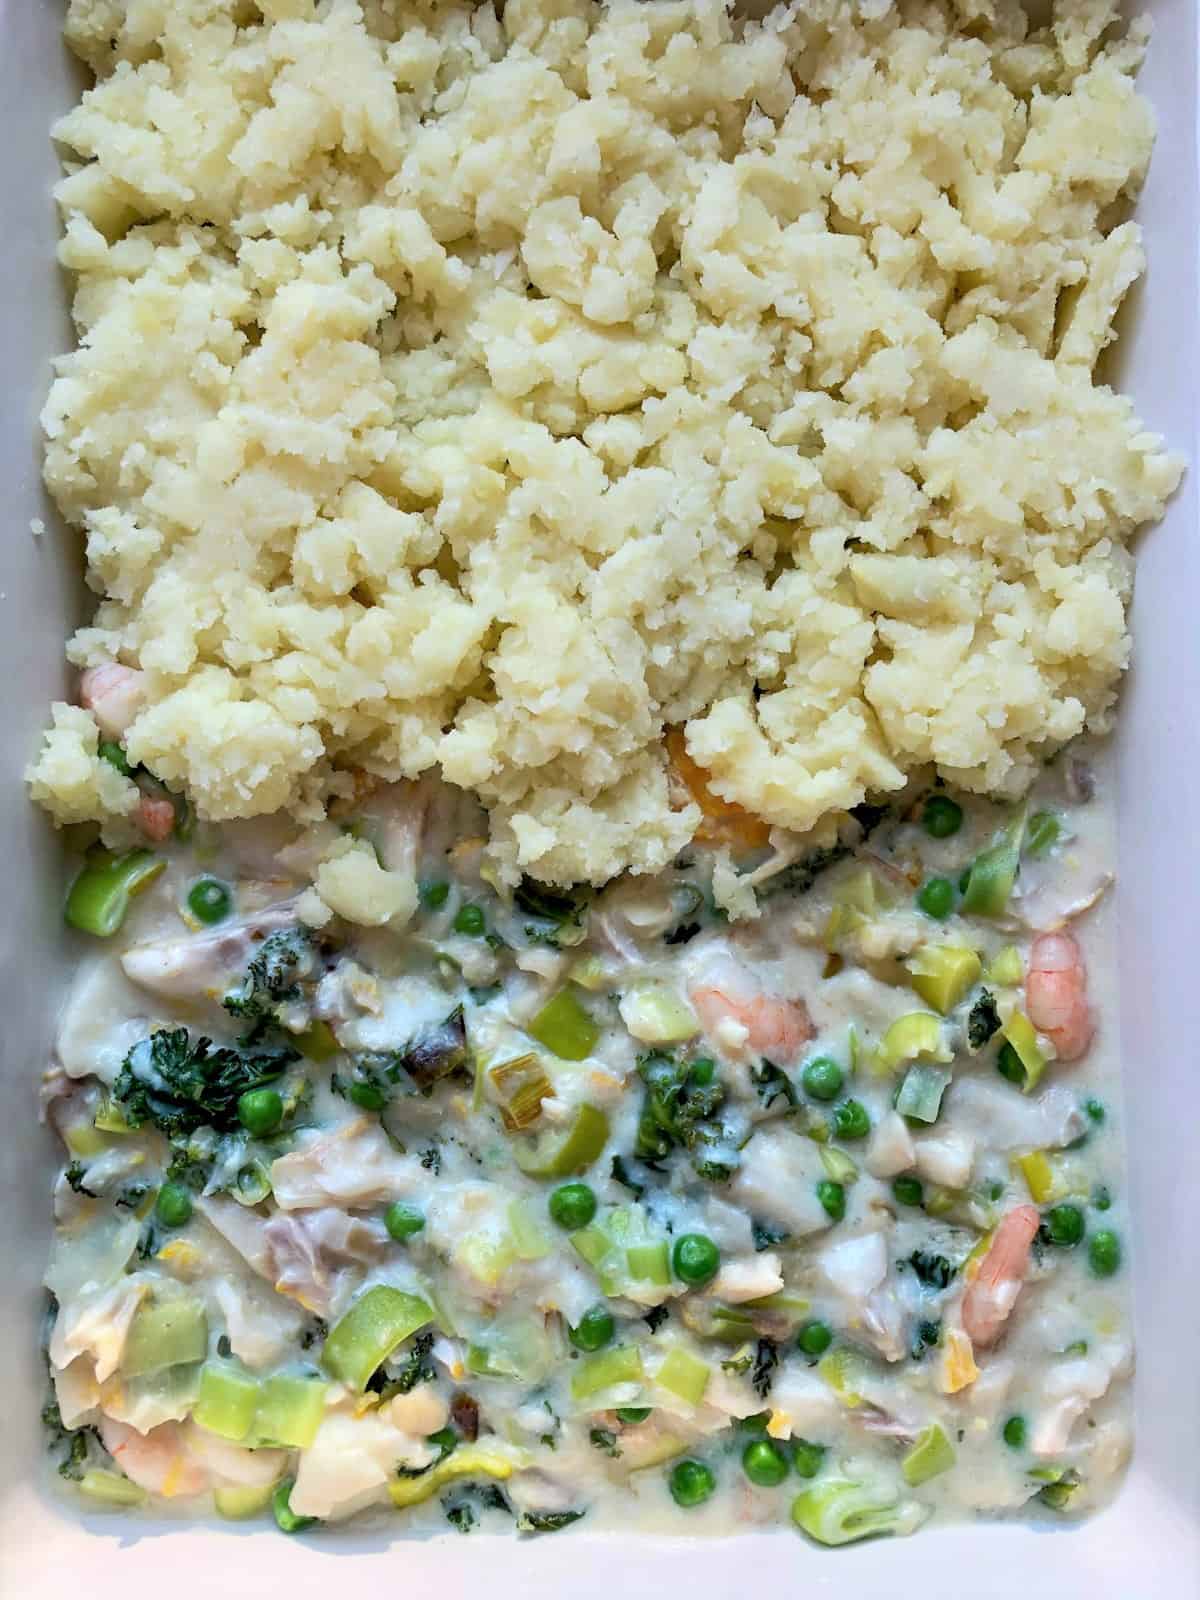 fish pie with leeks with mash added over half of pie